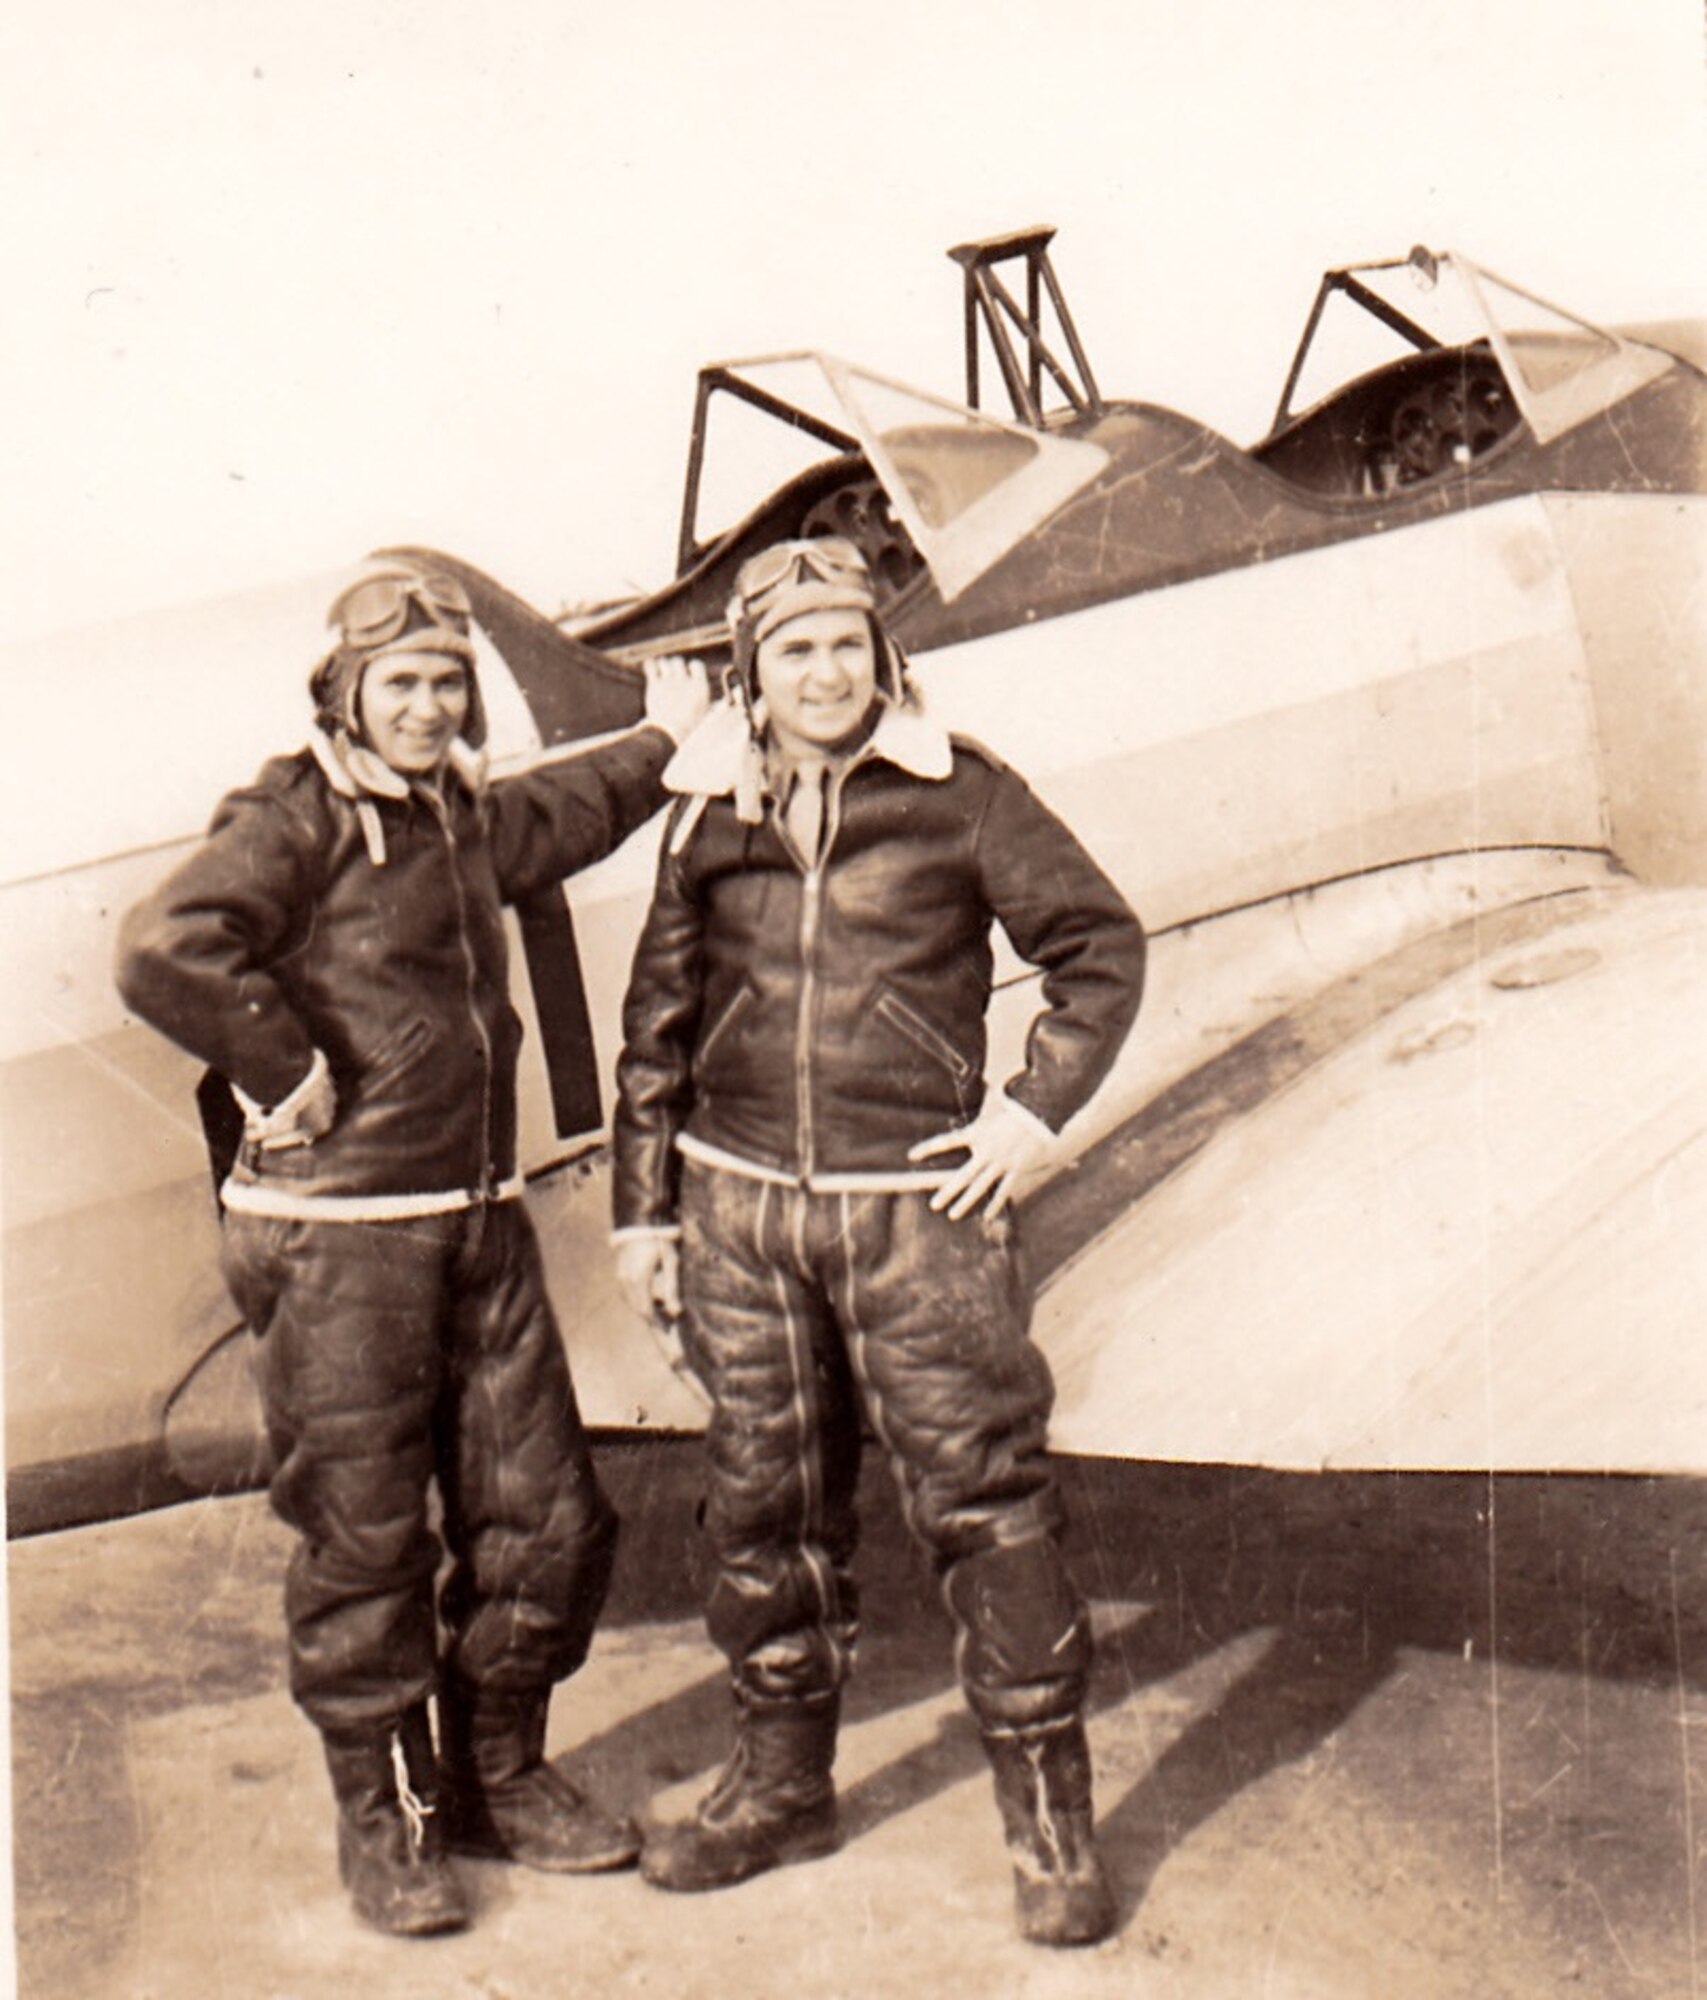 A vintage photo of retired Air Force Reserve Majs. Raymond “Glenn” Clanin and Russell “Lynn” Clanin in front of a PT-19 Trainer at the Aviation Cadet program at Michigan State College. They received their advanced training at various bases and were commissioned as 2nd Lieutenants, receiving their wings in August 1944 at Ellington Field, Texas. Seventy-one years later, the 92-year-old twin brothers are recipients of the French government's highest distinction for their military service as World War II veterans, the Legion of Honor medal, presented by Christophe Lemoine, French consul general in Los Angeles, during a ceremony held at Los Angeles Air Force Base in El Segundo, Calif. (Courtesy photo, U.S. Army Air Forces, AAF Training Command, Ellington Field, Texas)